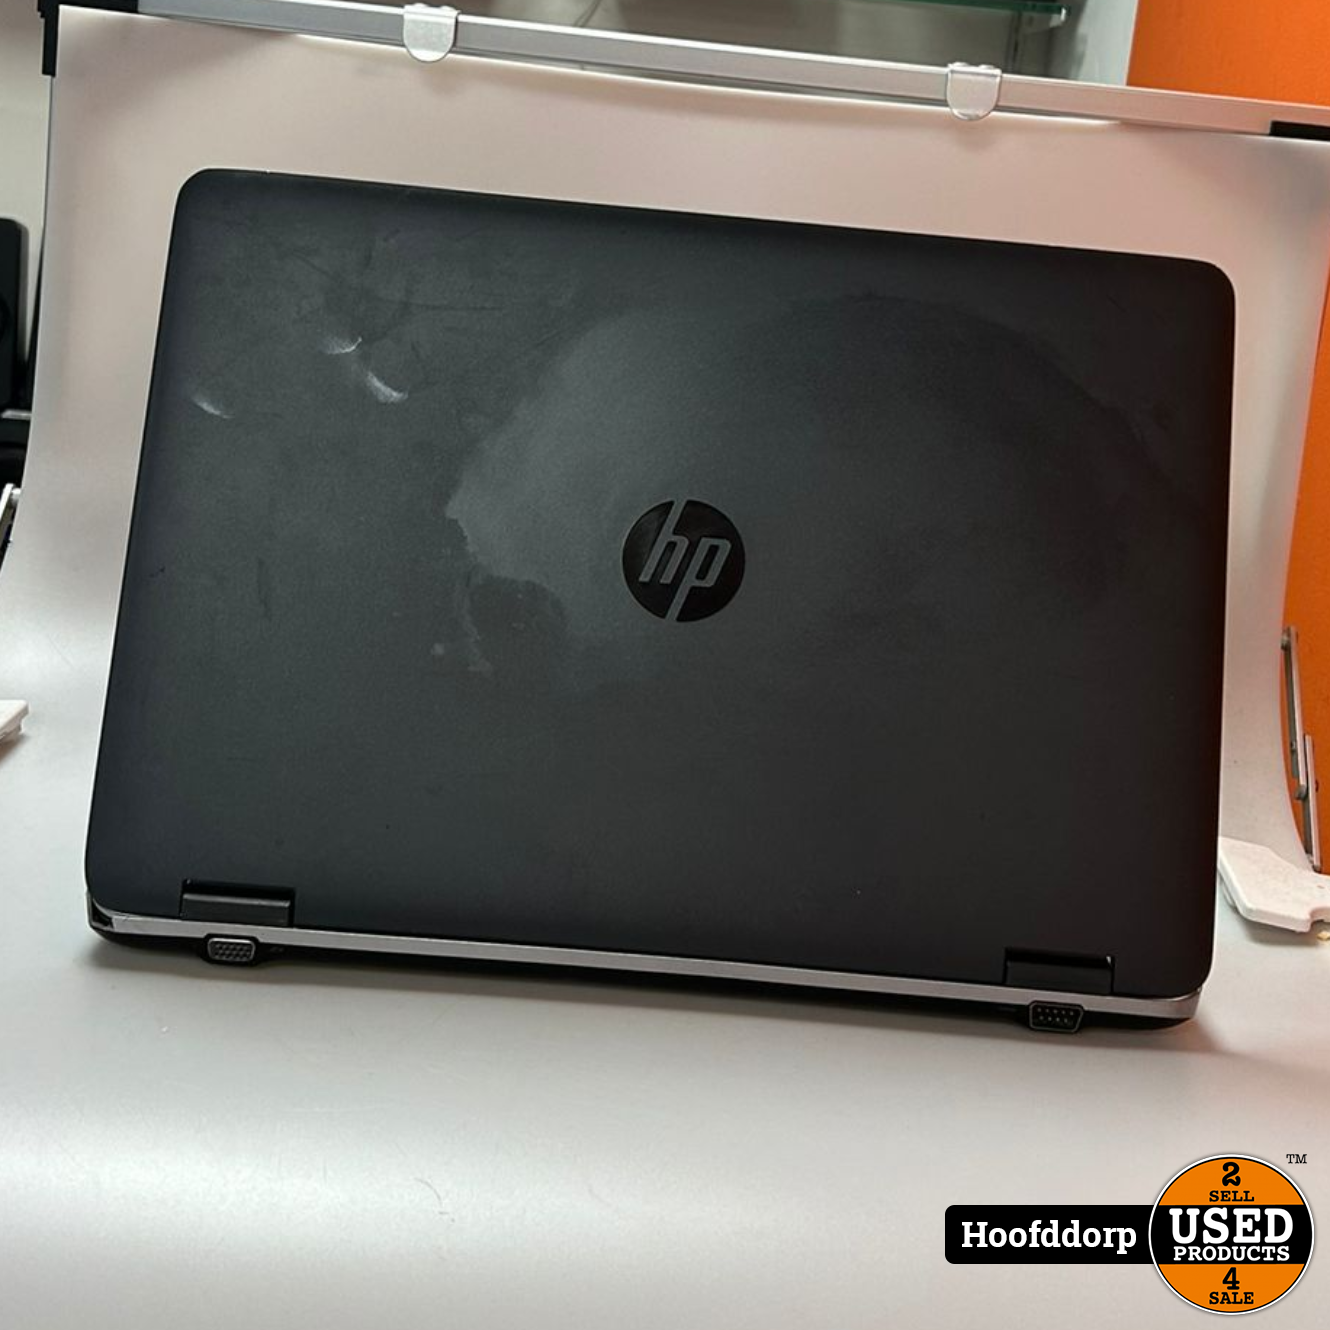 Hp Probook 650 G2 16gb512gbi5 Used Products Hoofddorp 1521